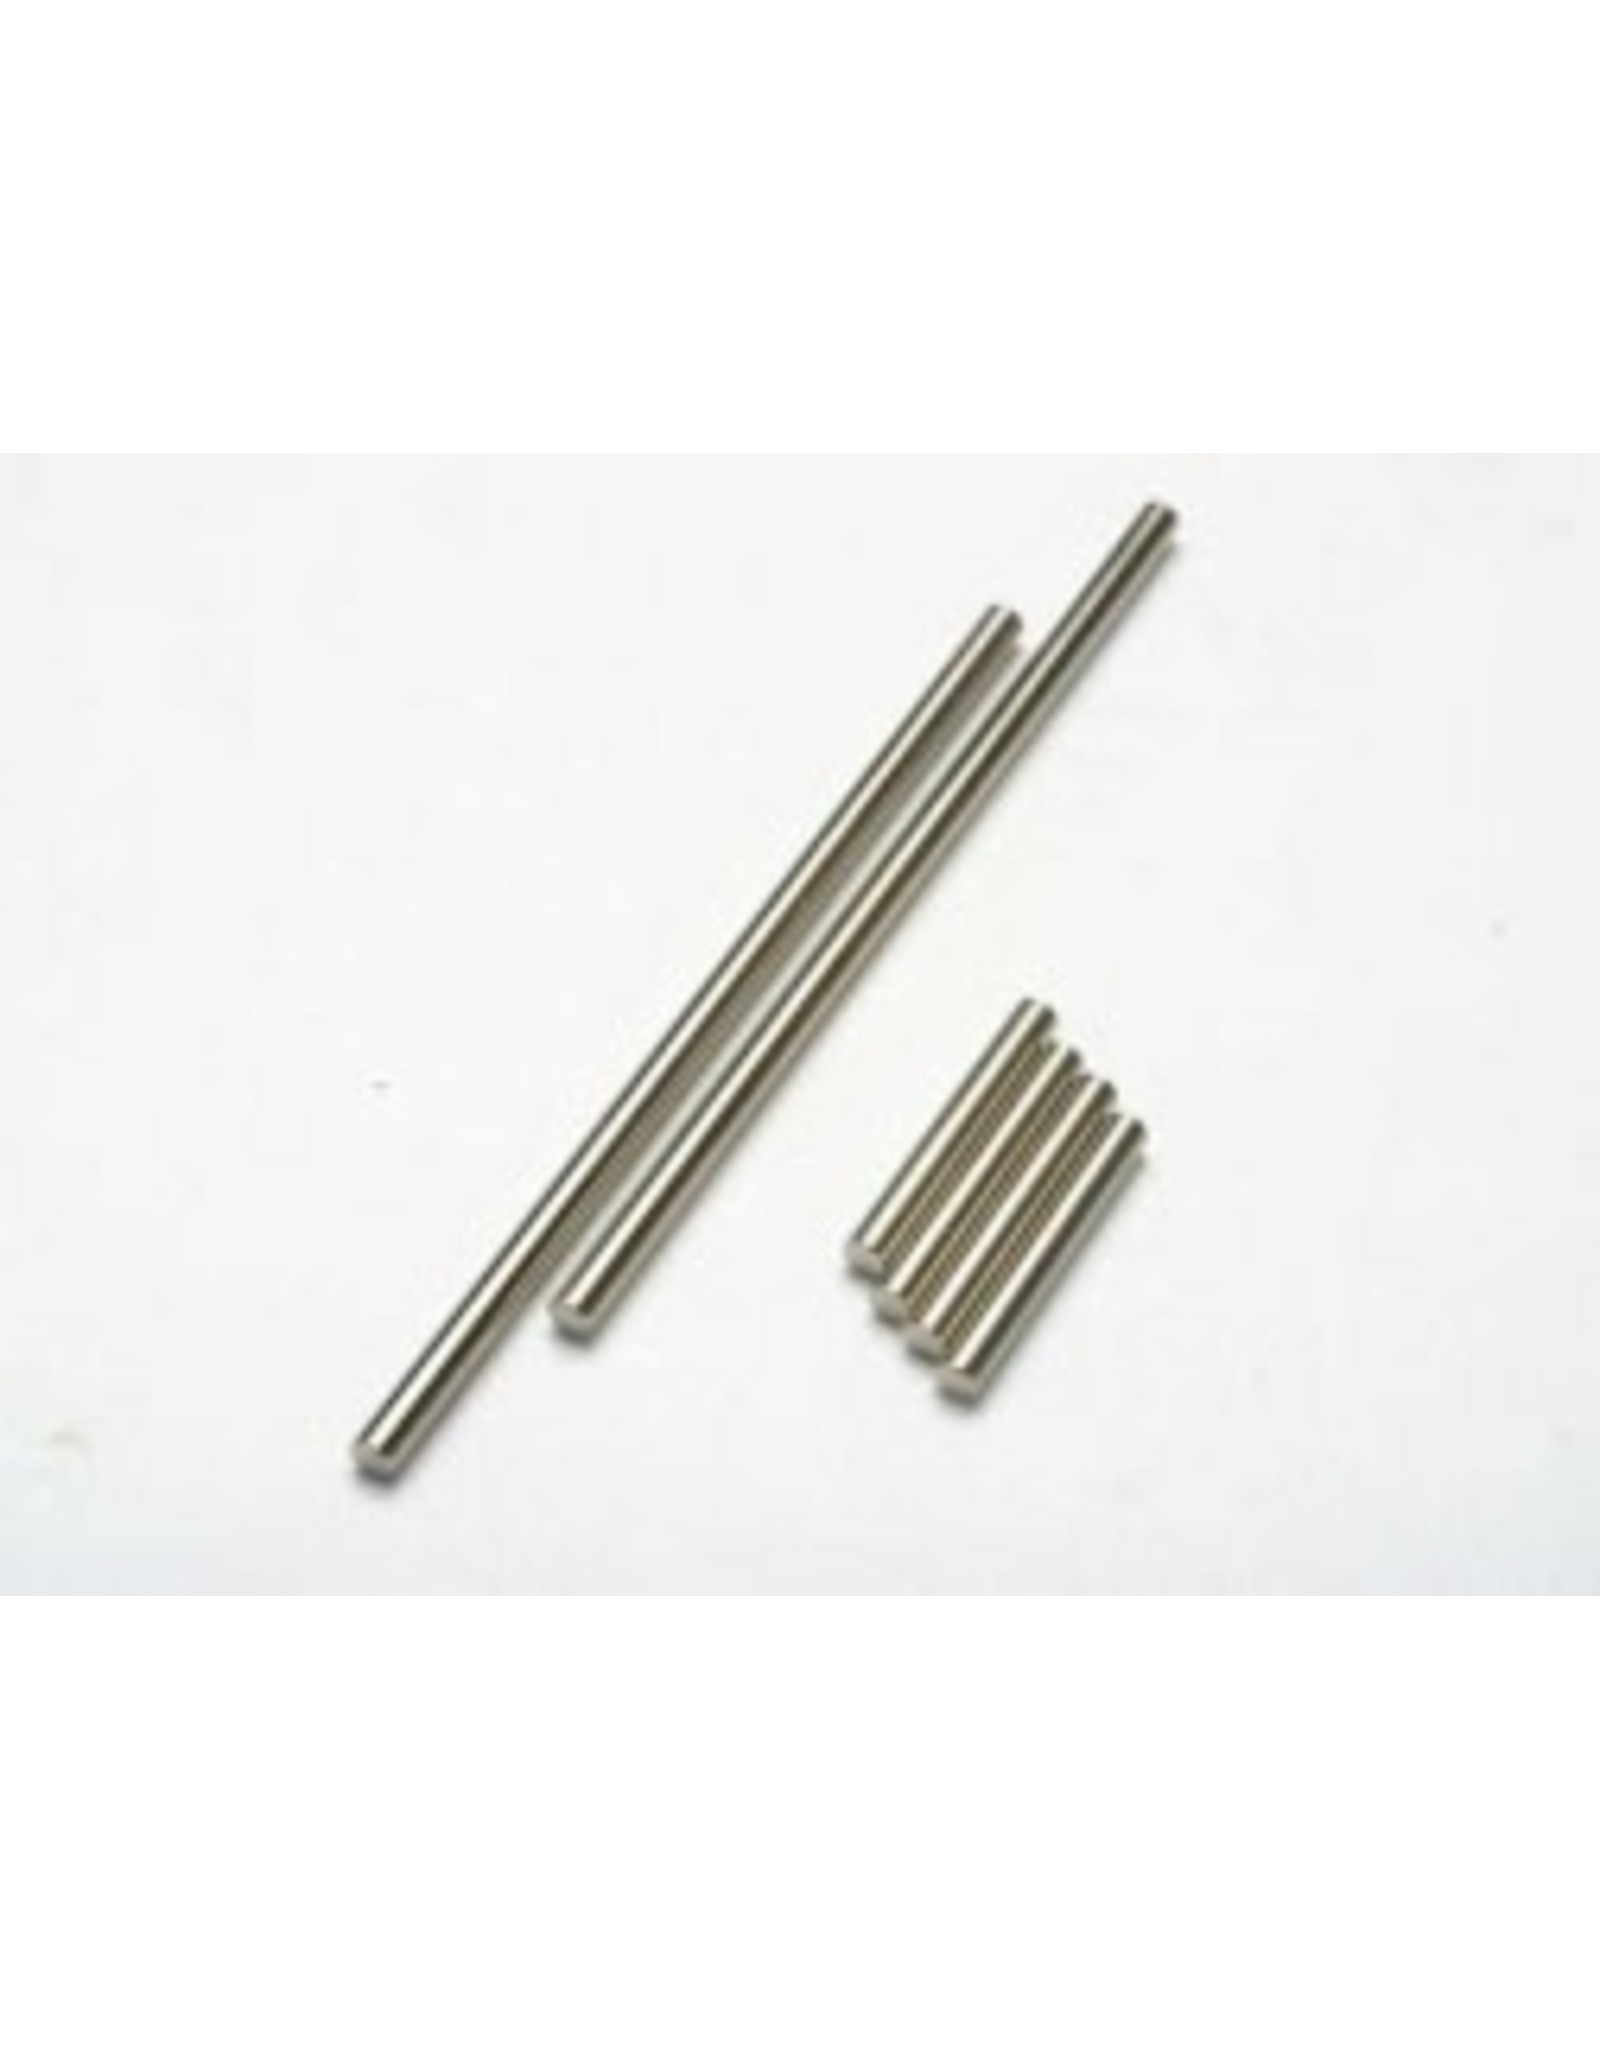 Traxxas Suspension pin set (front or rear, hardened steel), 3x20mm (4), 3x40mm (2))